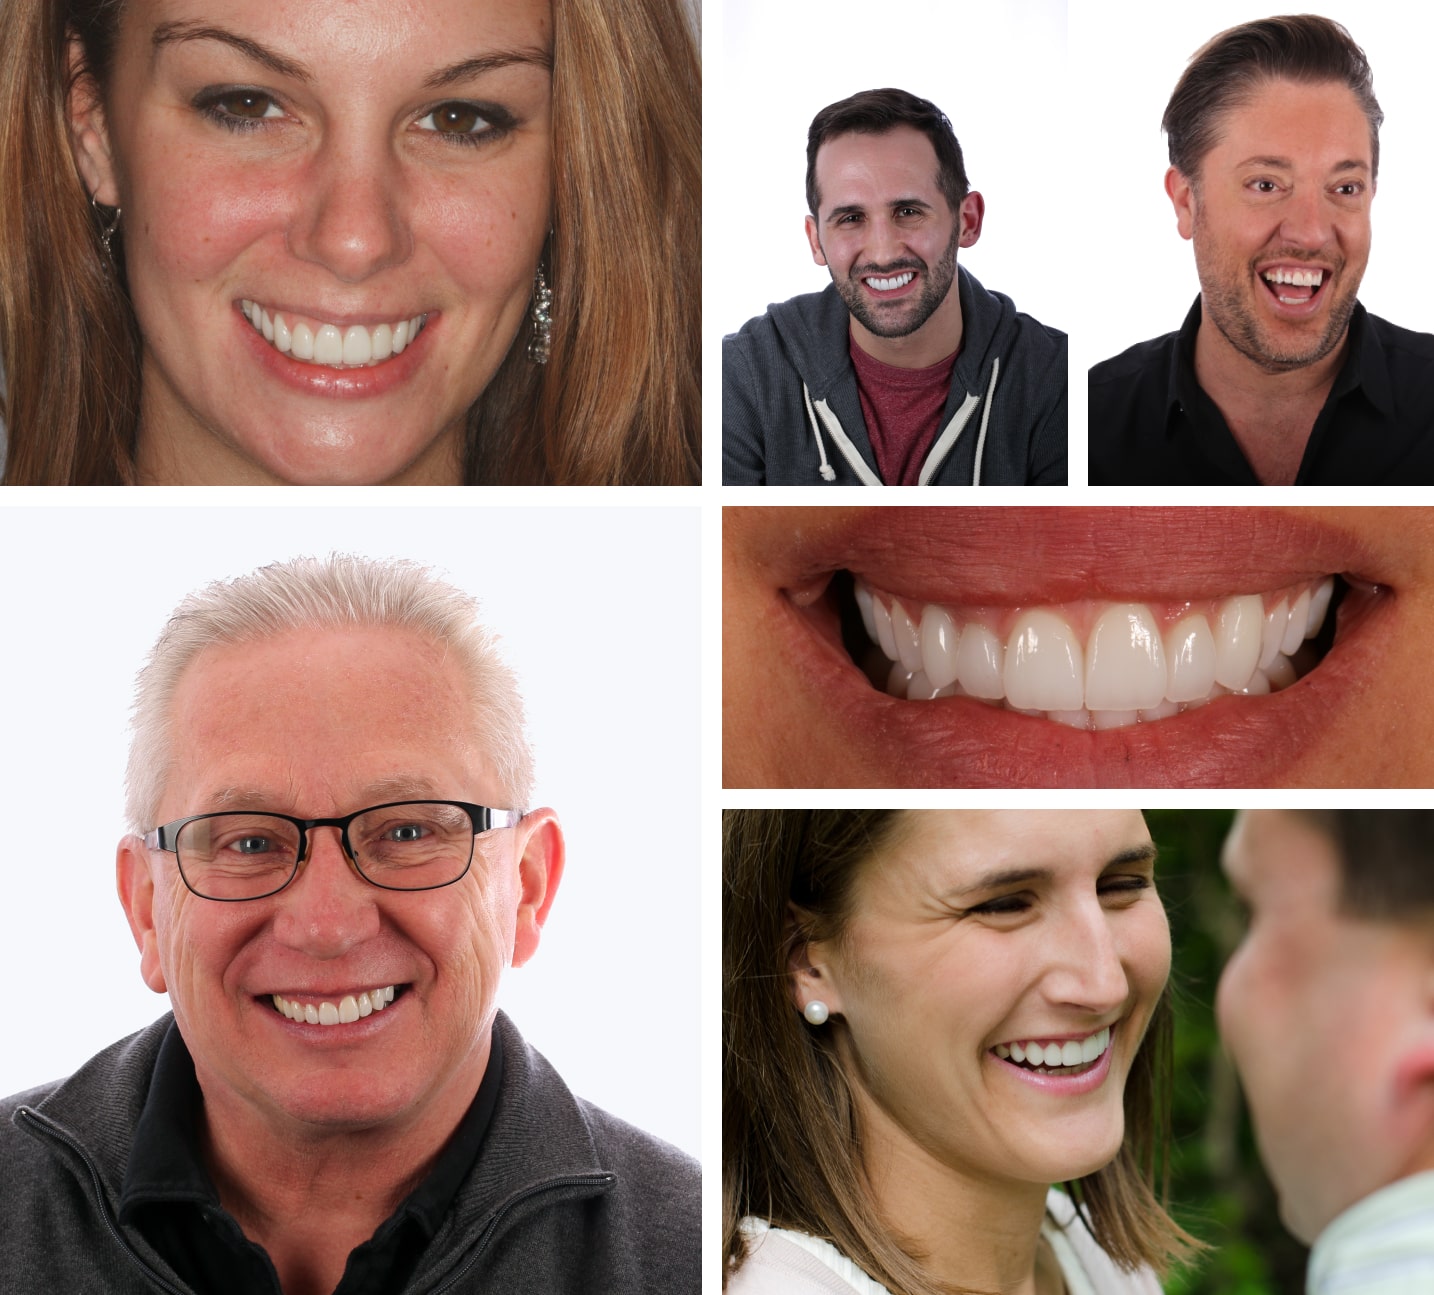 A collage of the beautiful new smiles of Dr. Stelzer's patients